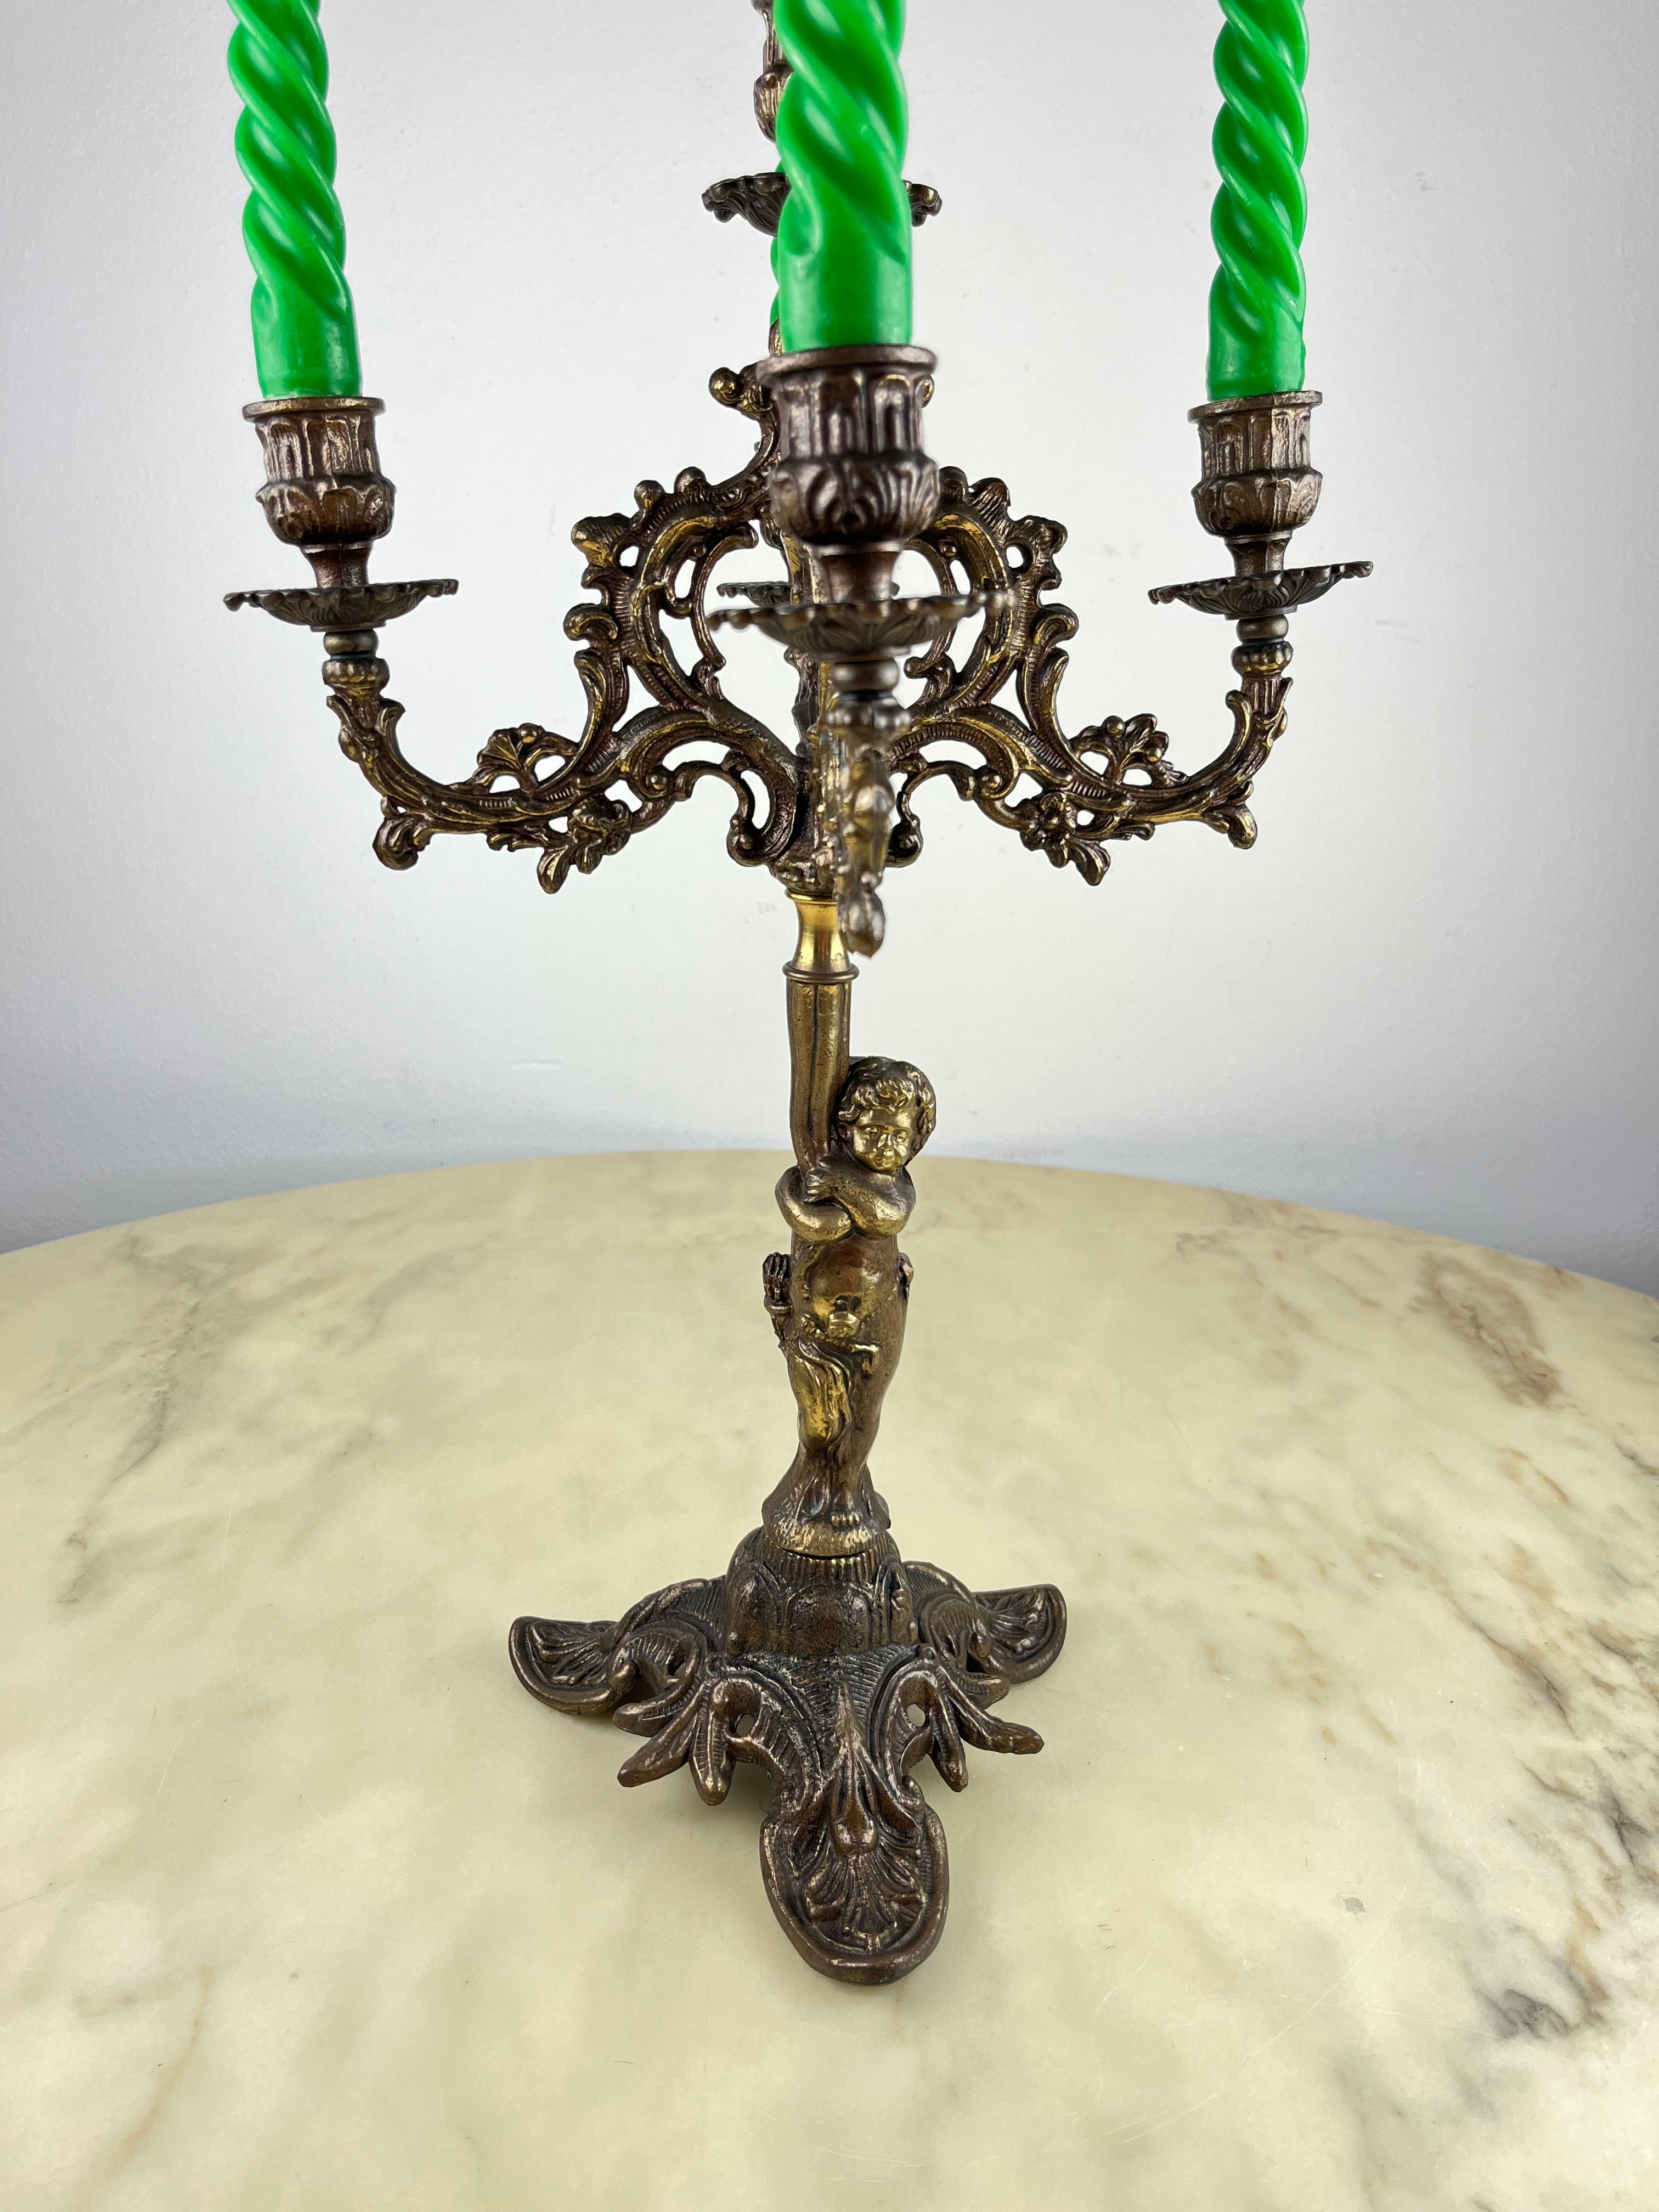 5-flame bronze candelabra, Italy, 1950s
Found in a noble apartment. Good conditions.